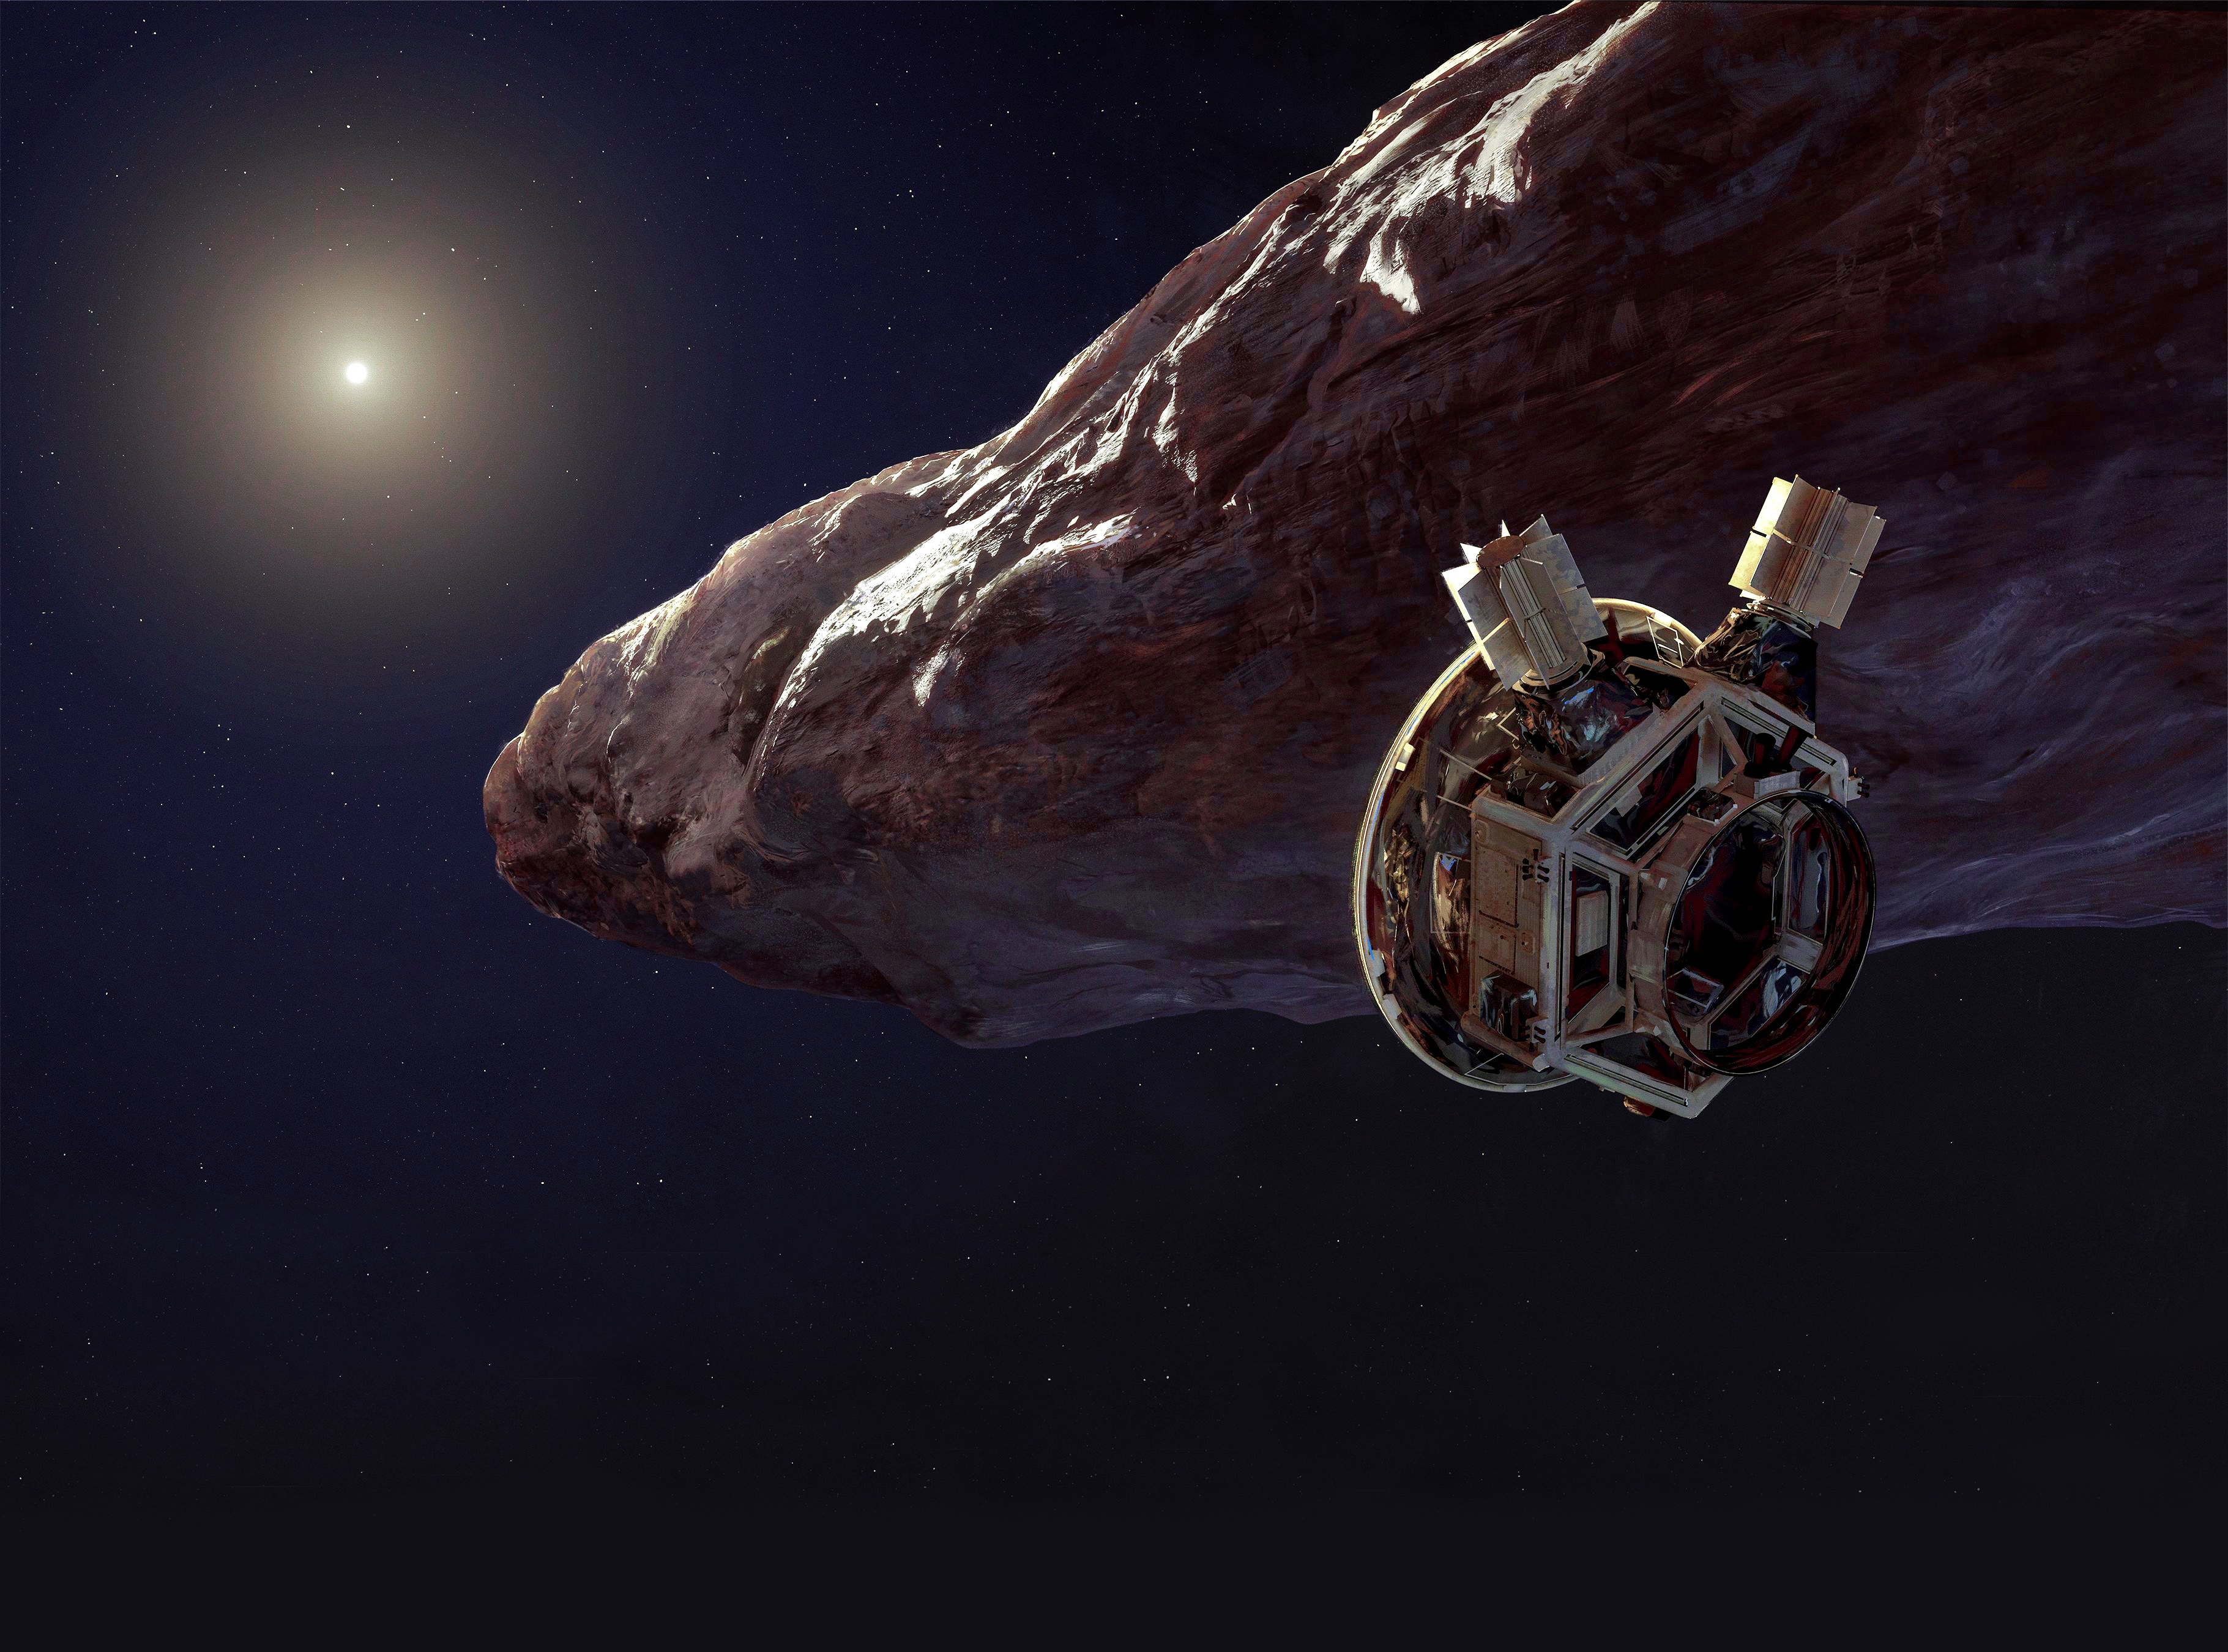 Now far from the Sun in the outer solar system, the strange interstellar object known as ‘Oumuamua is depicted here as it’s approached by a questing spacecraft. Project Lyra is hoping to launch such a craft to explore our first known visitor from another solar system and provide the detailed study scientists desperately seek.